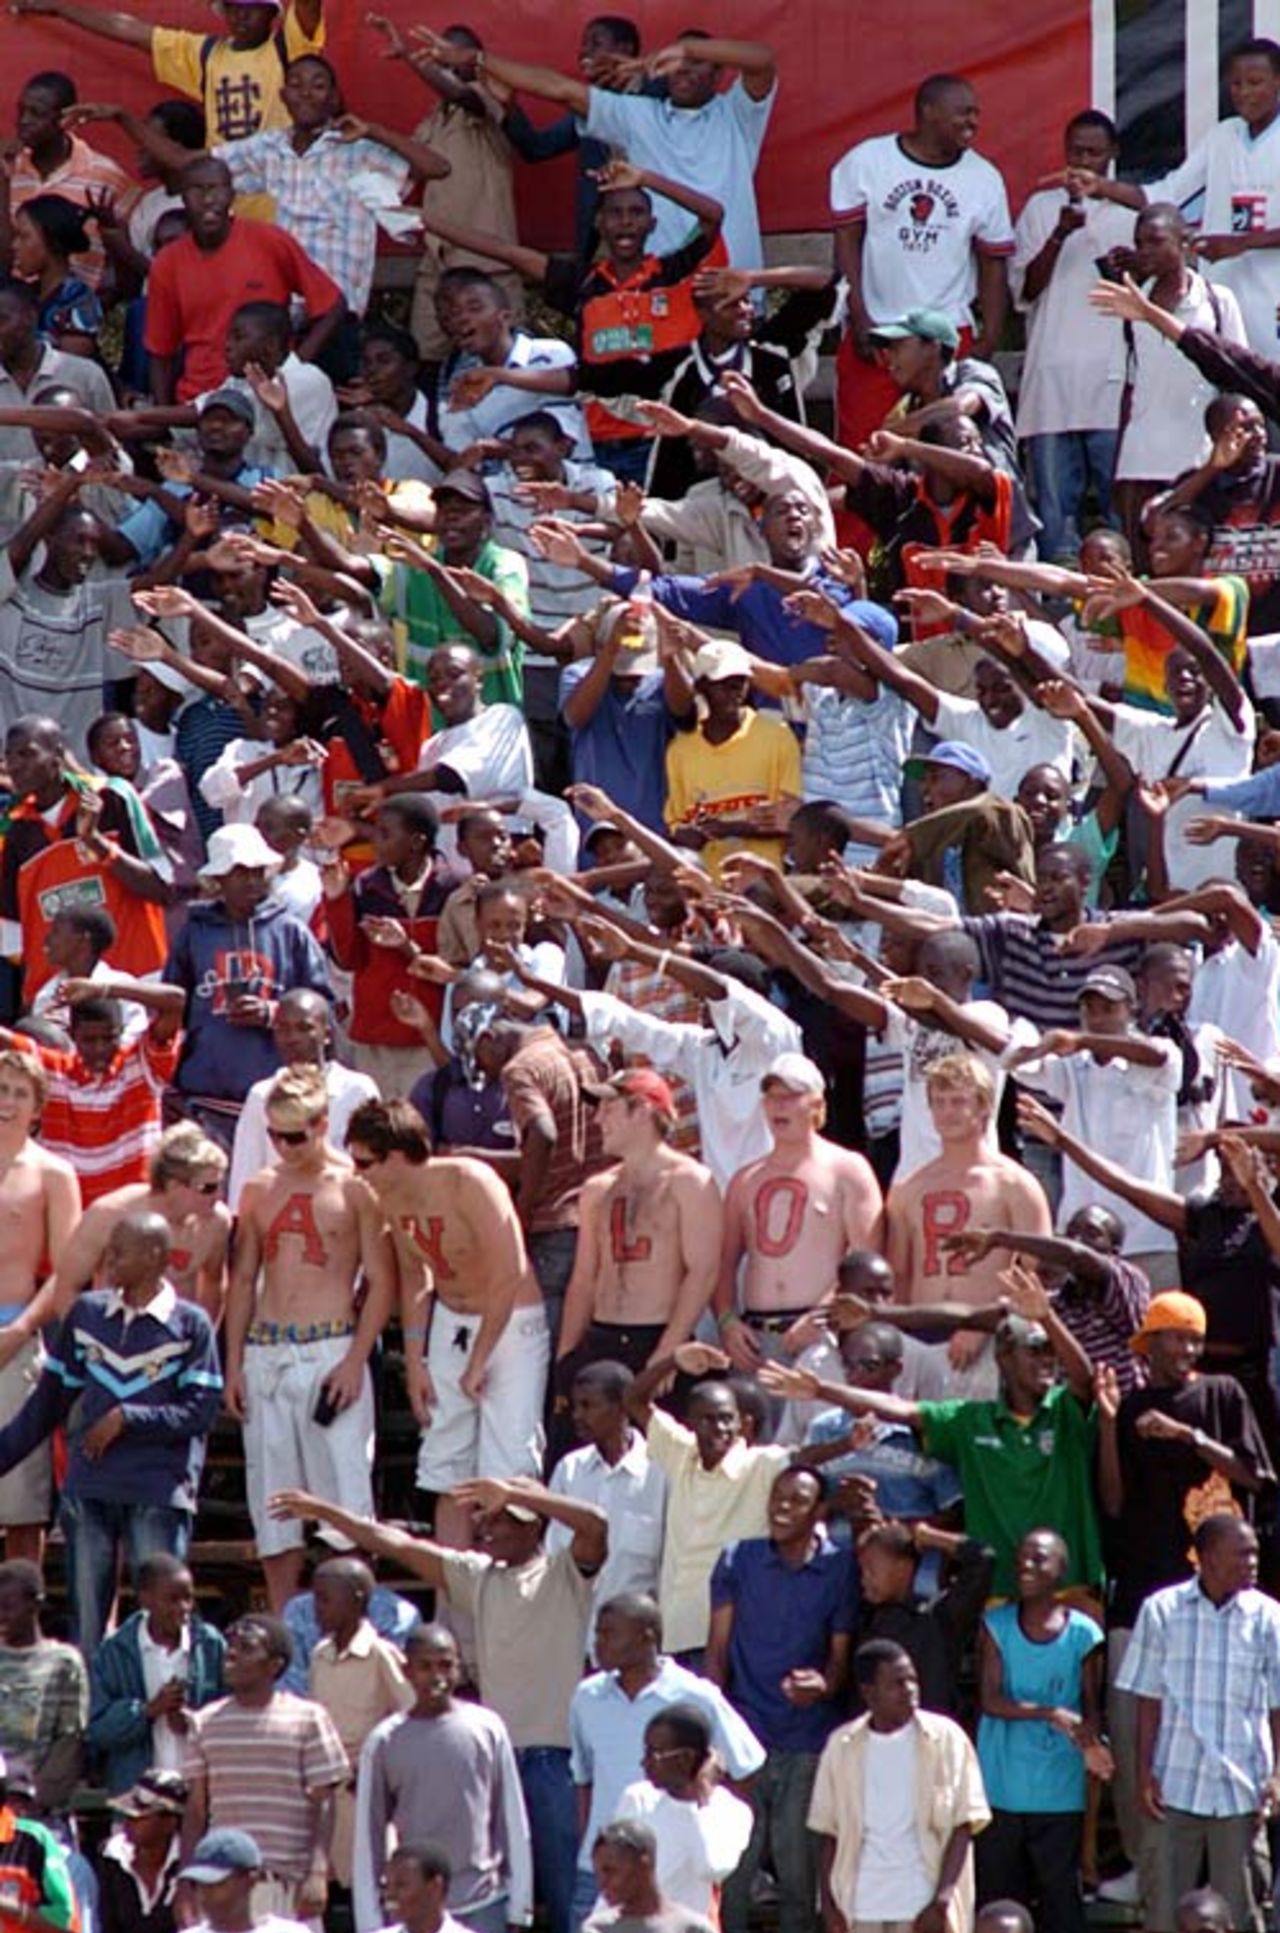 The Brendan Taylor fan club out in force, Zimbabwe v West Indies, 3rd ODI, Harare, December 4, 2007